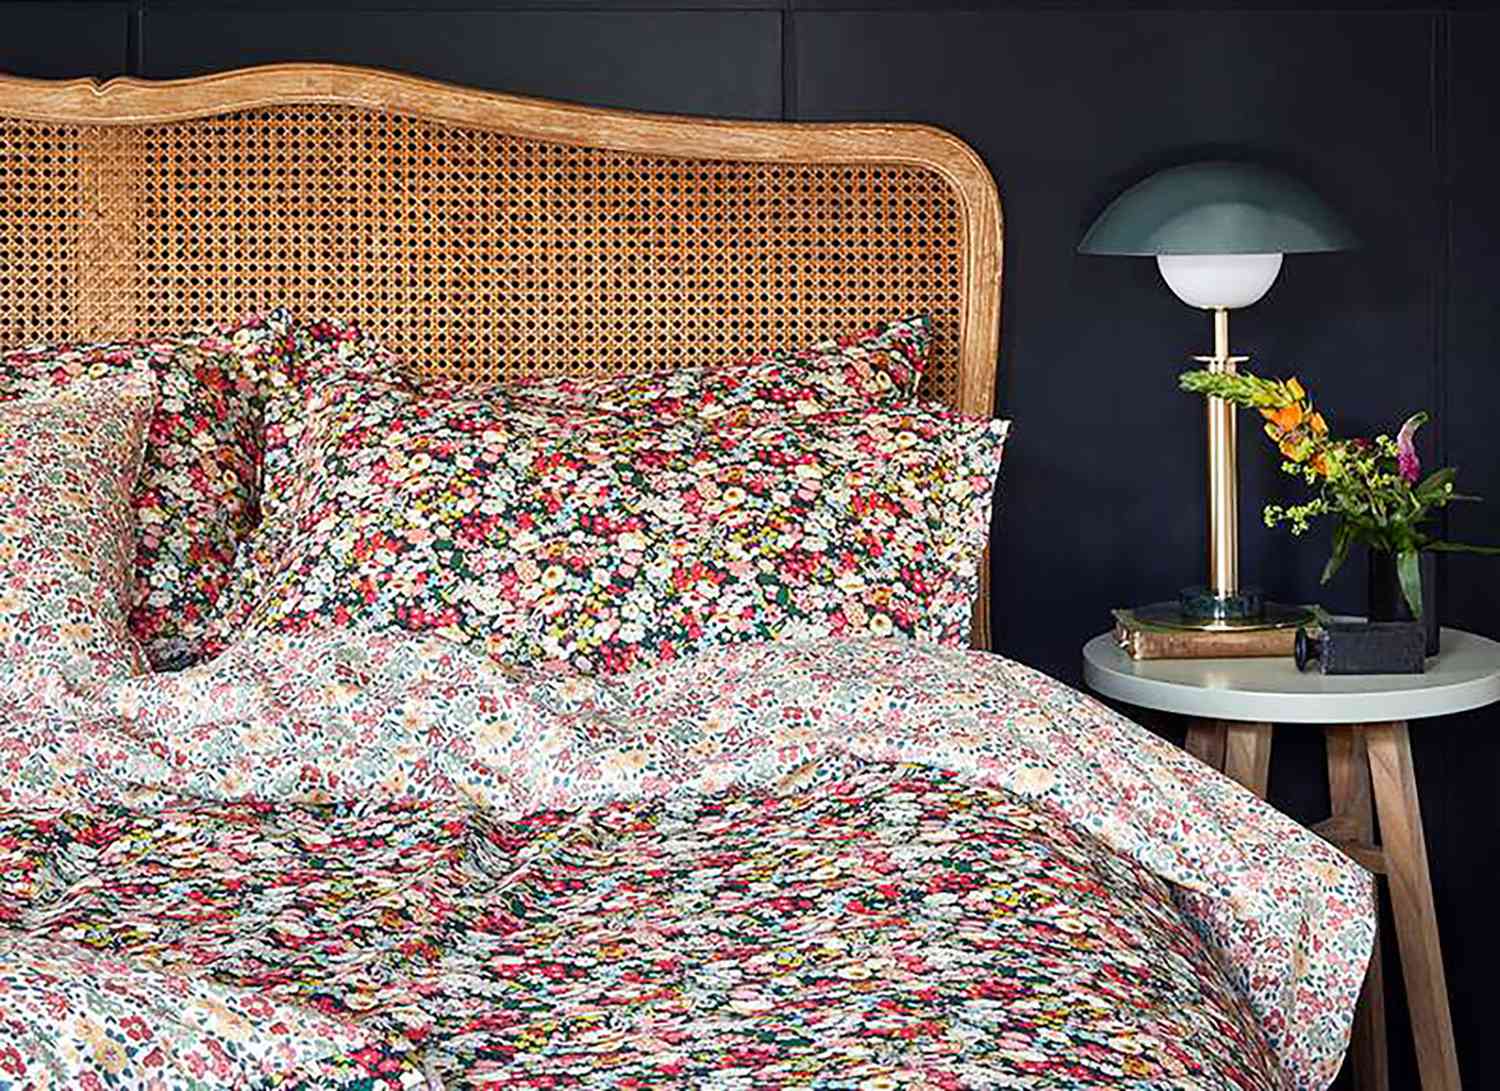 floral bedsheet and bedding in styled room